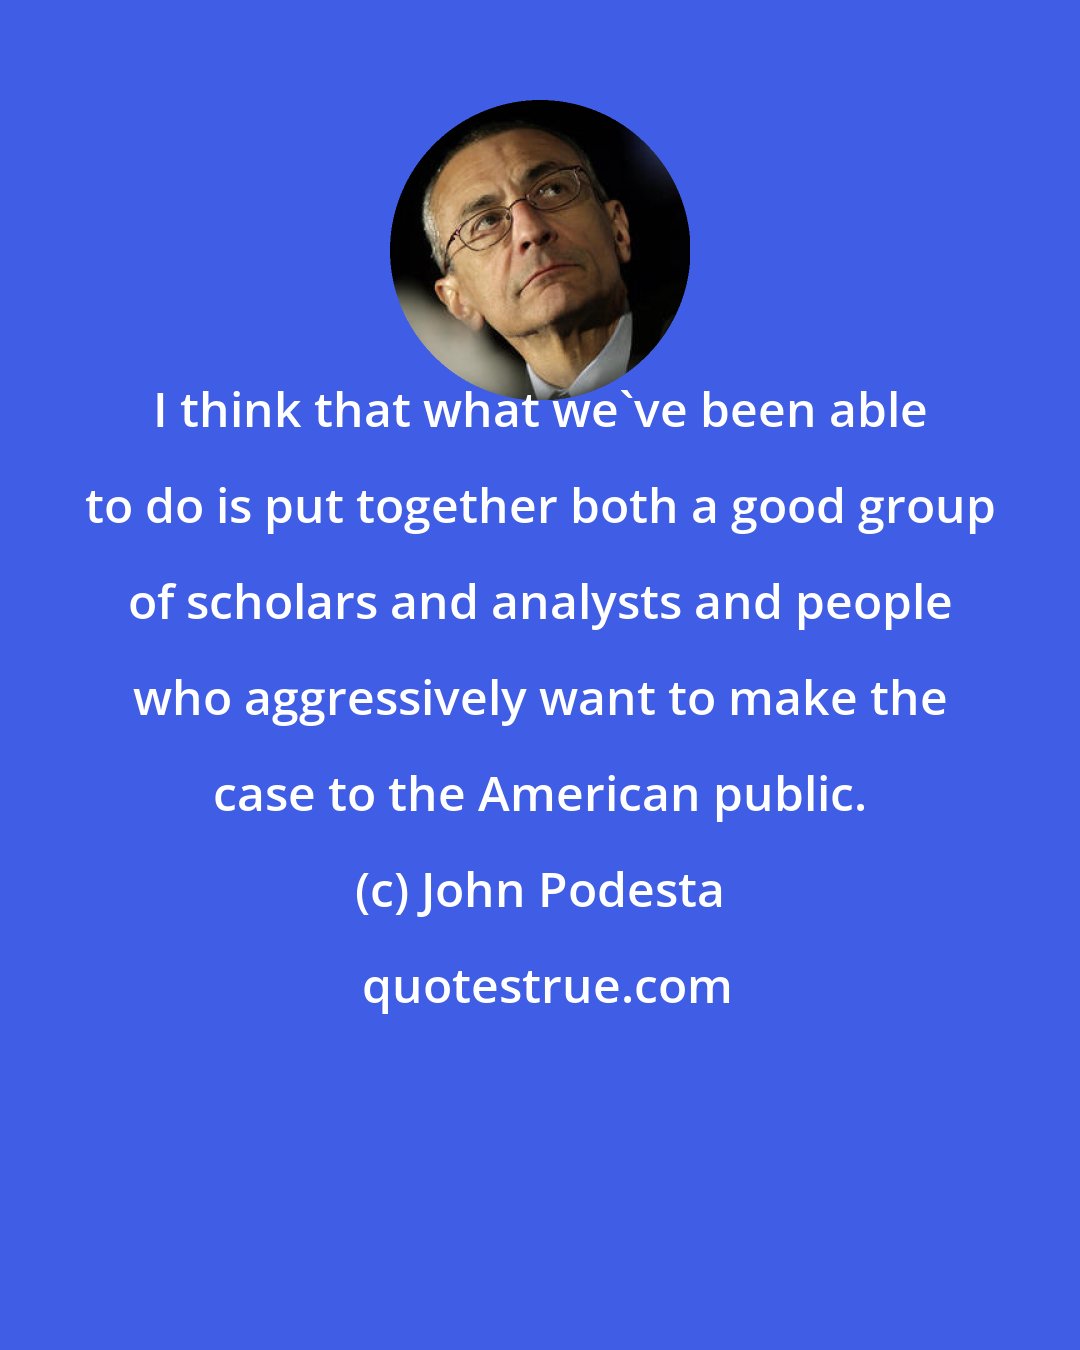 John Podesta: I think that what we've been able to do is put together both a good group of scholars and analysts and people who aggressively want to make the case to the American public.